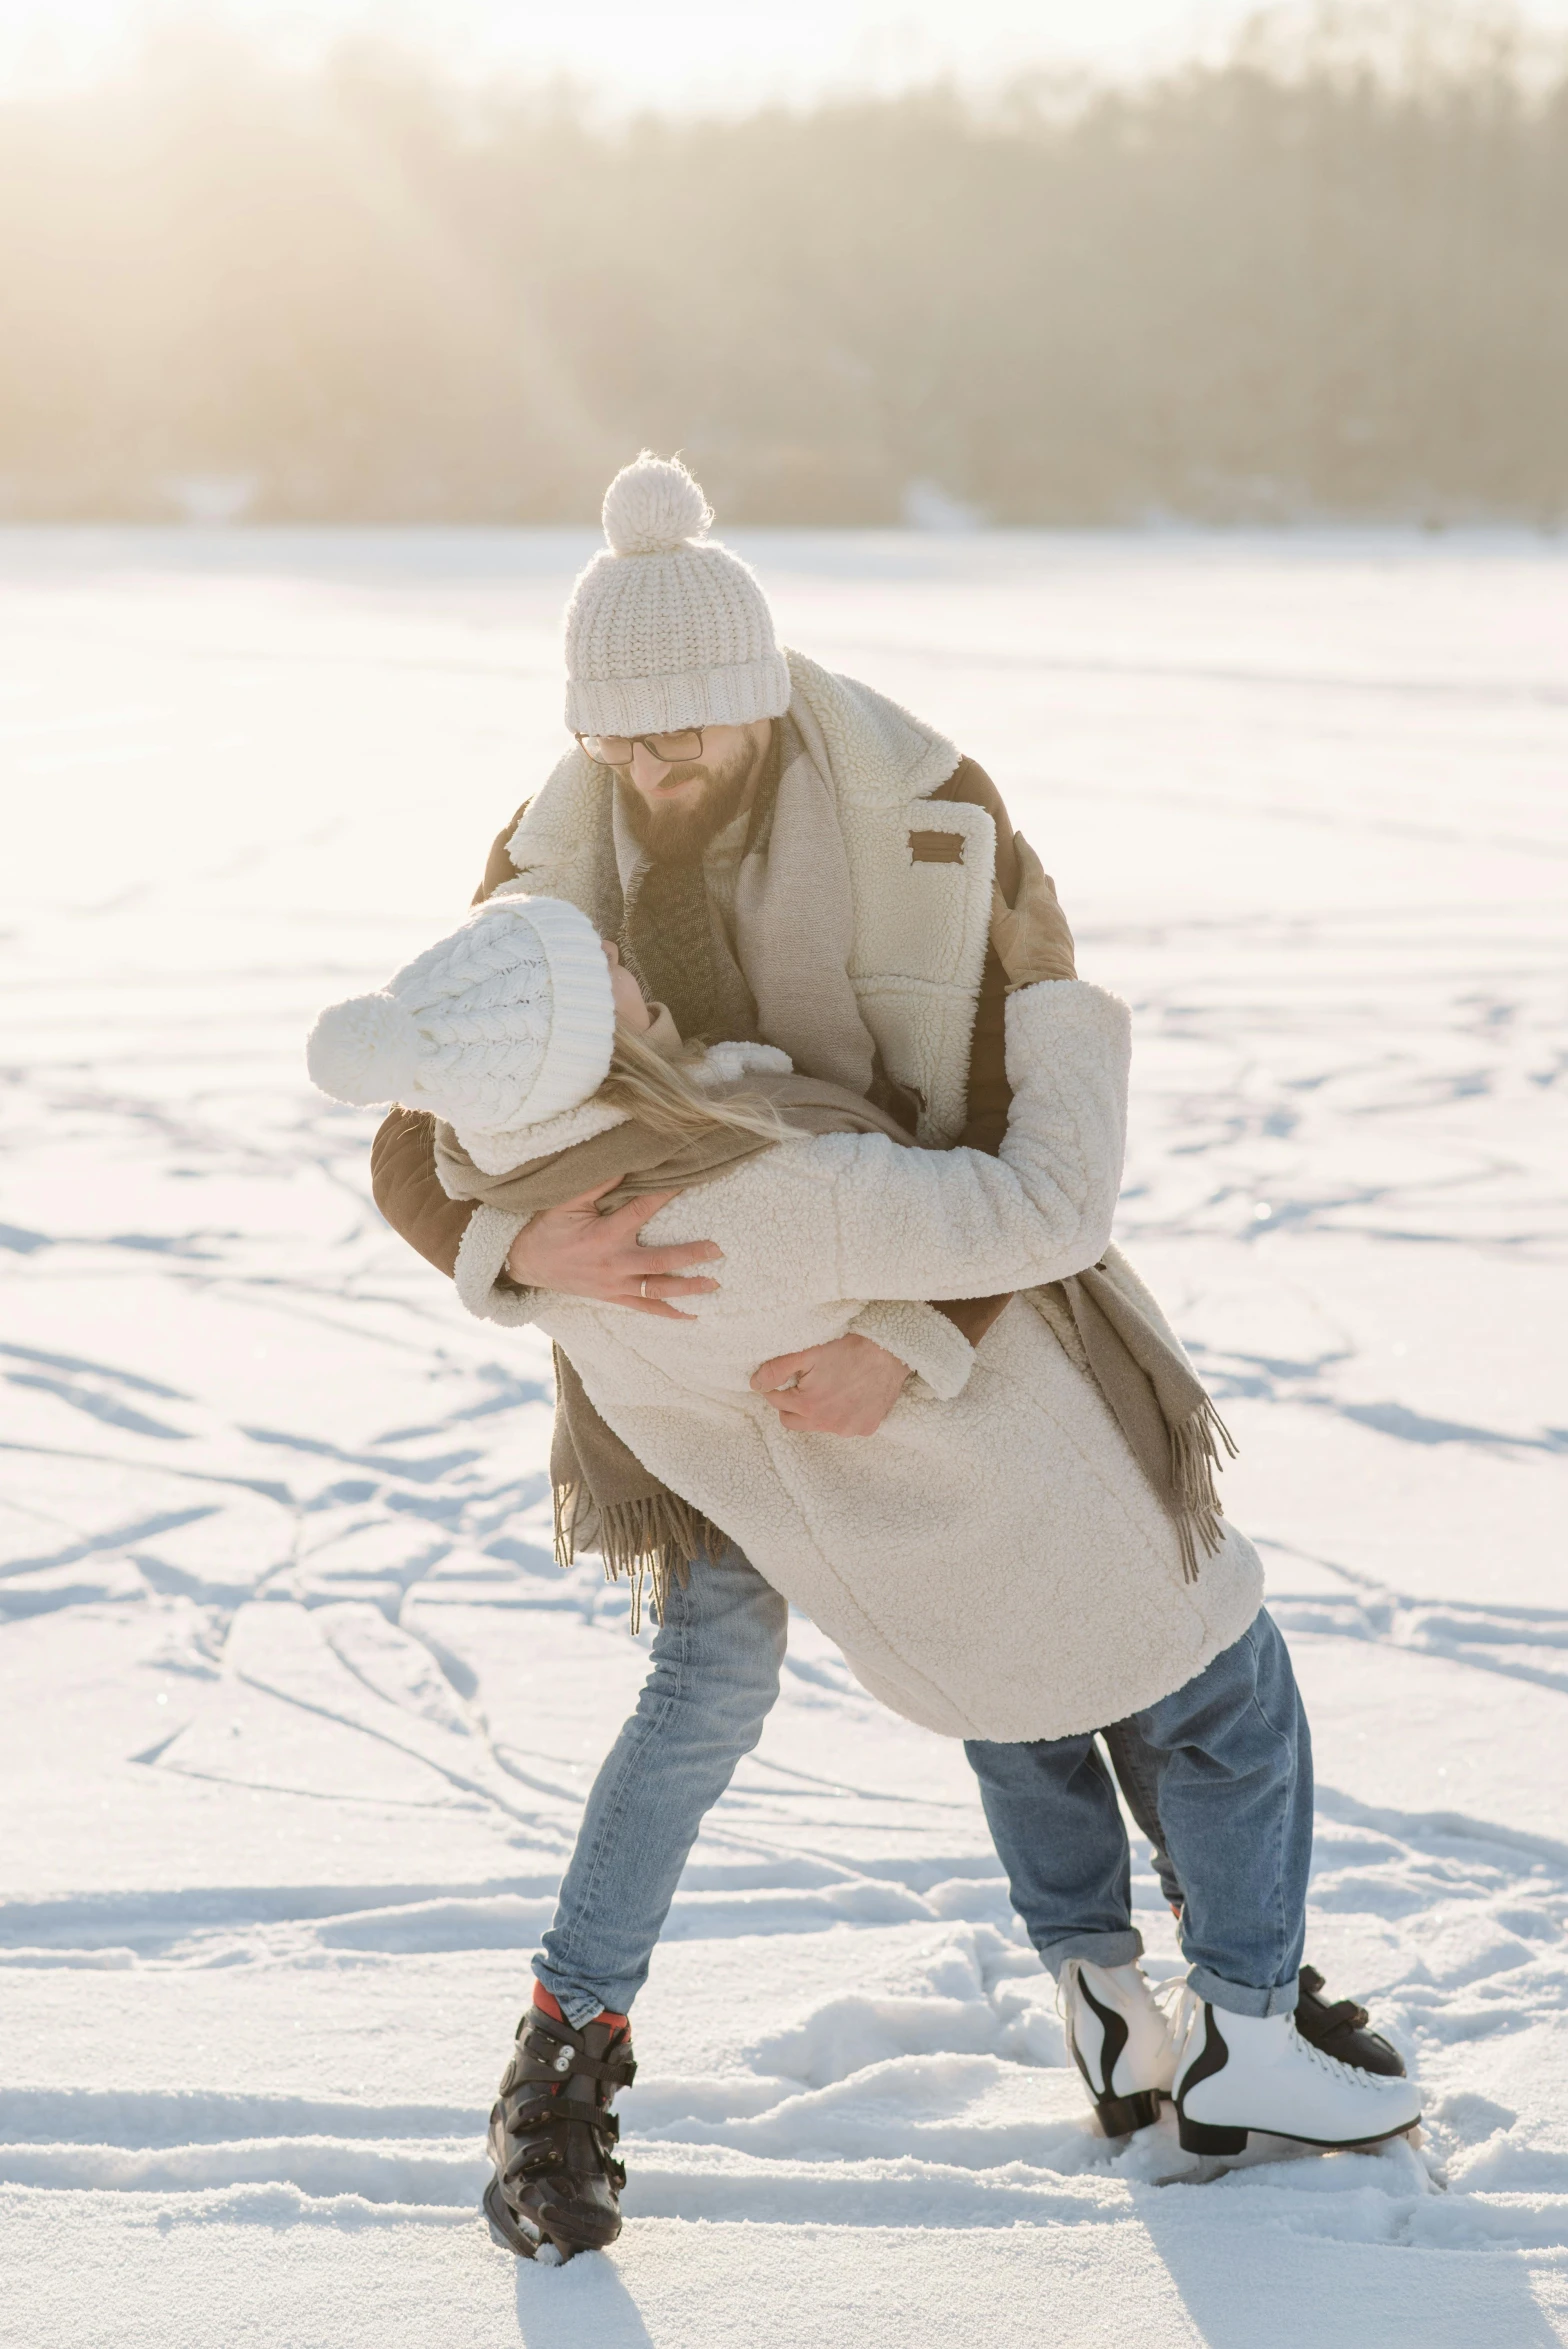 a man giving a woman a hug in the snow, walking on ice, hugging each other, best practice, tan